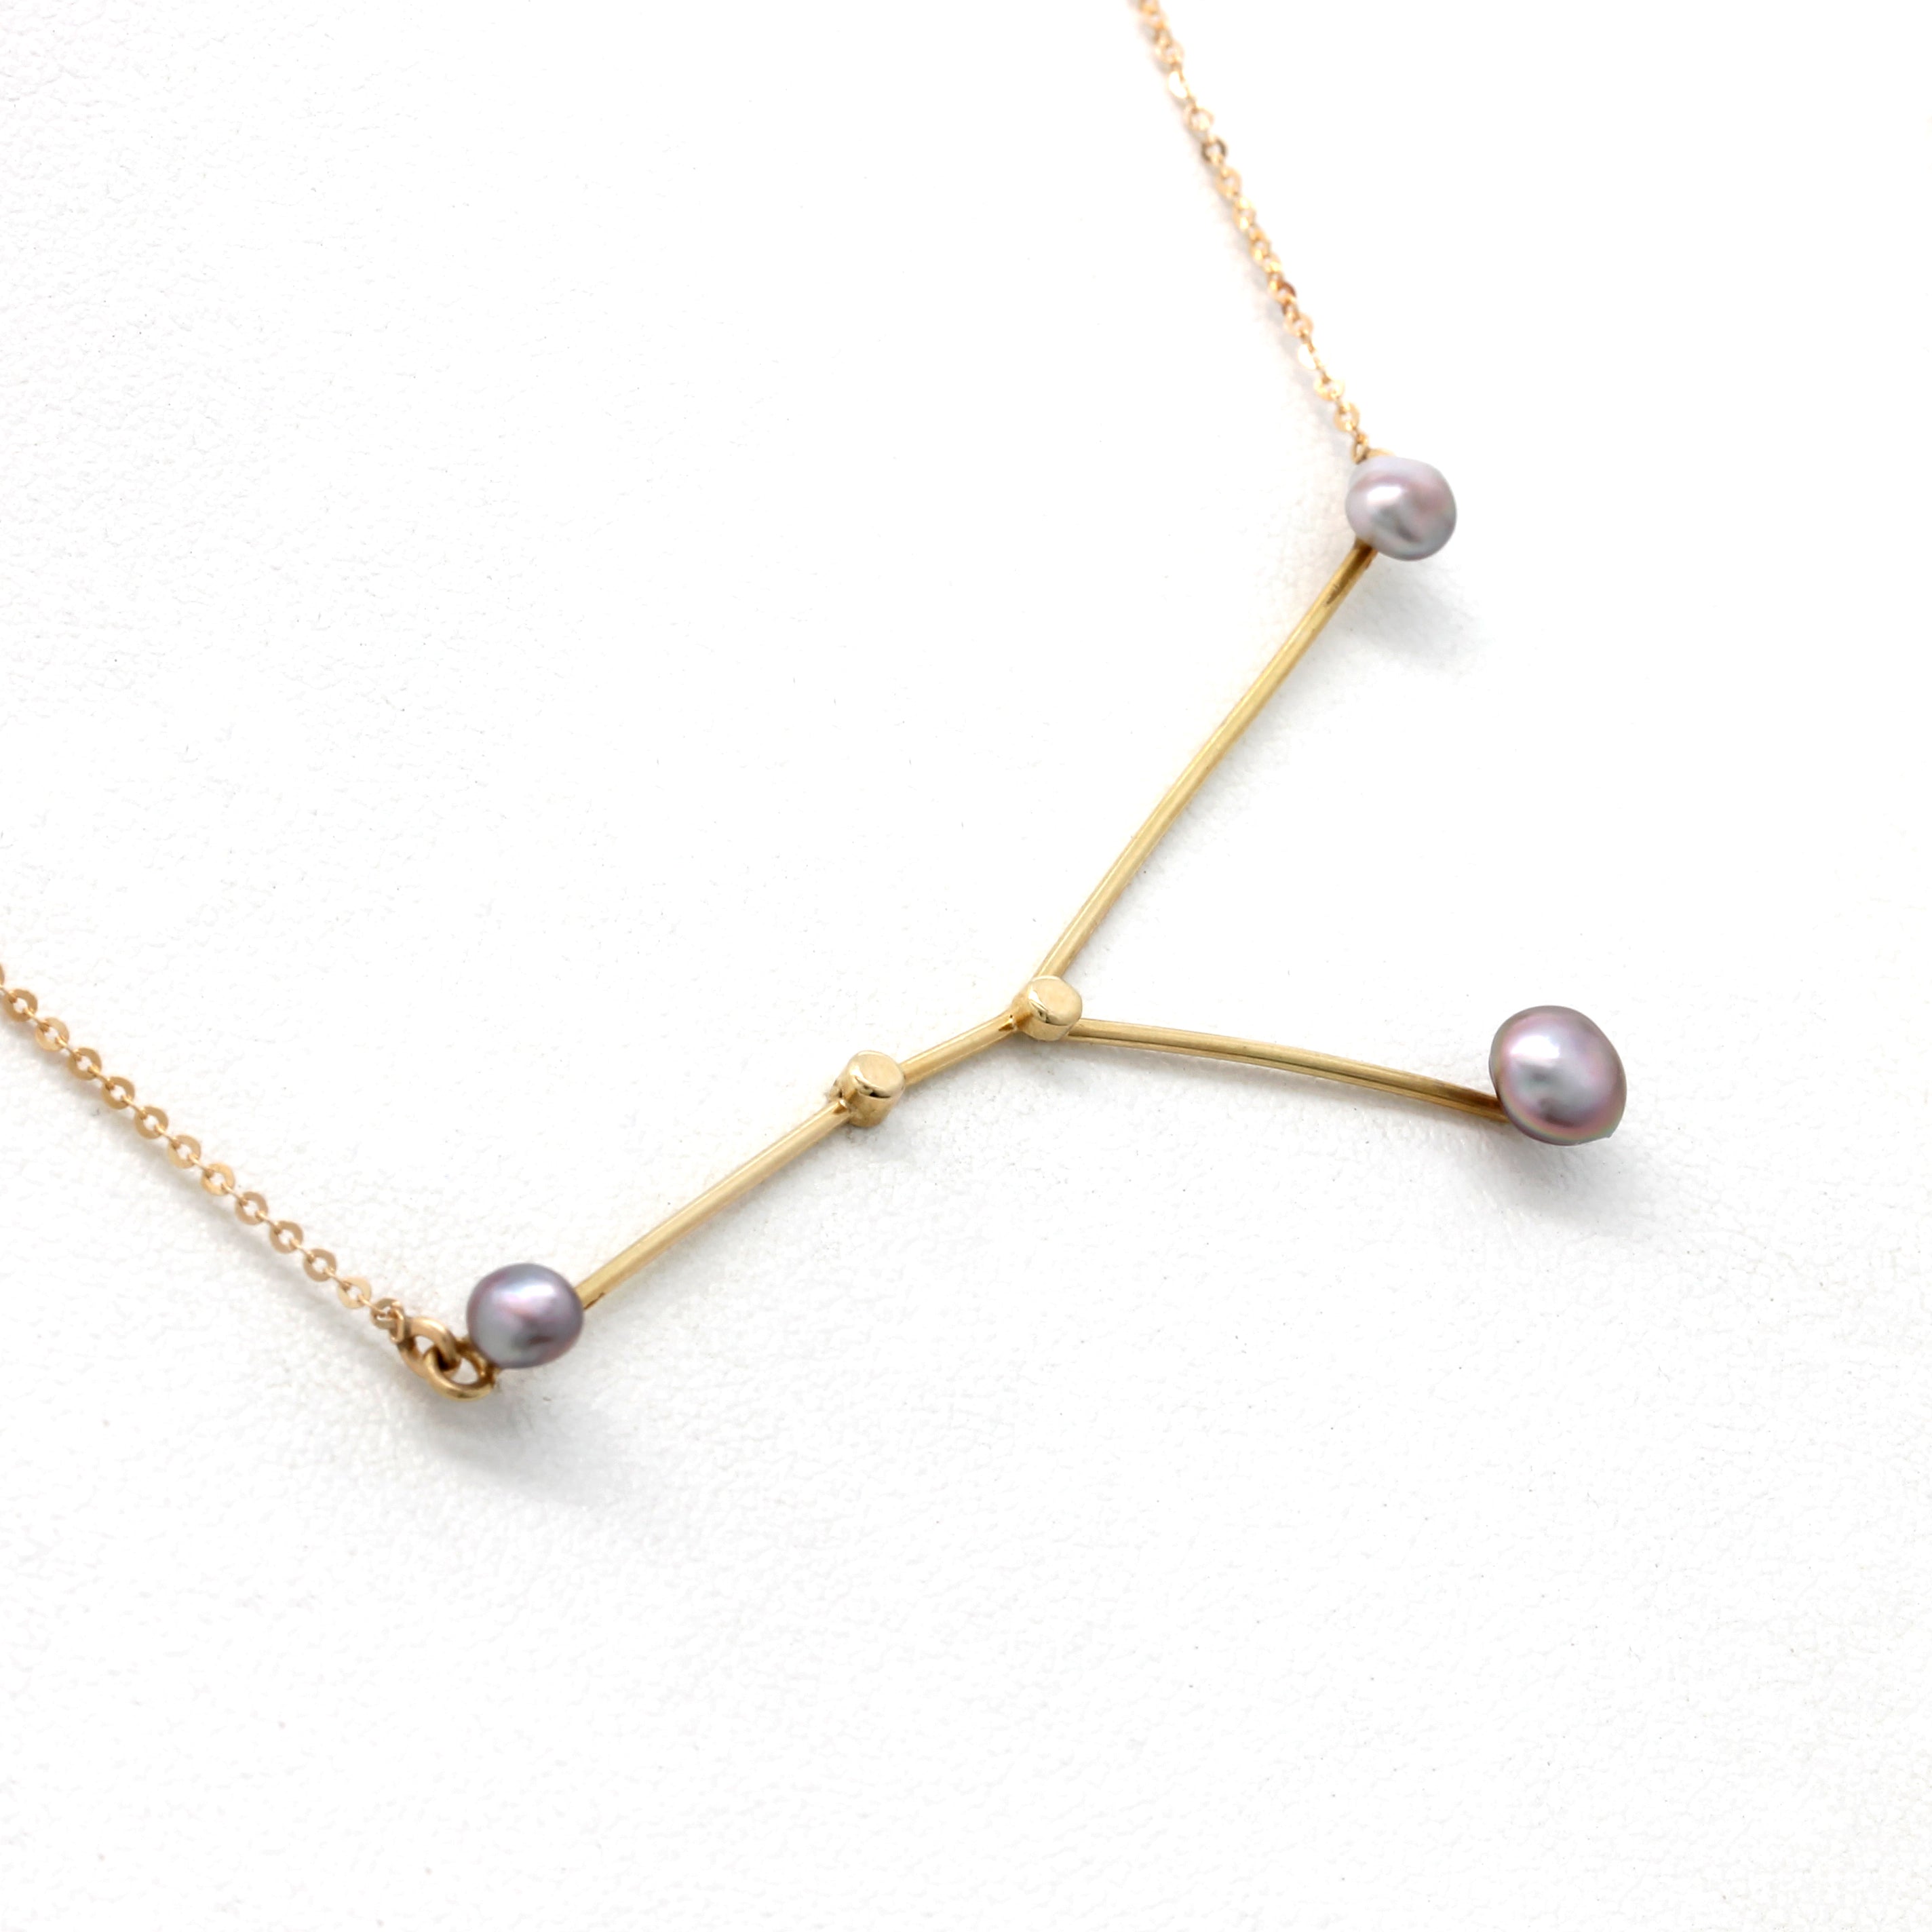 "Cancer (Jun 21st - July 22th)" 14K Yellow Gold Pendant and Chain with Cortez Keshi Pearls